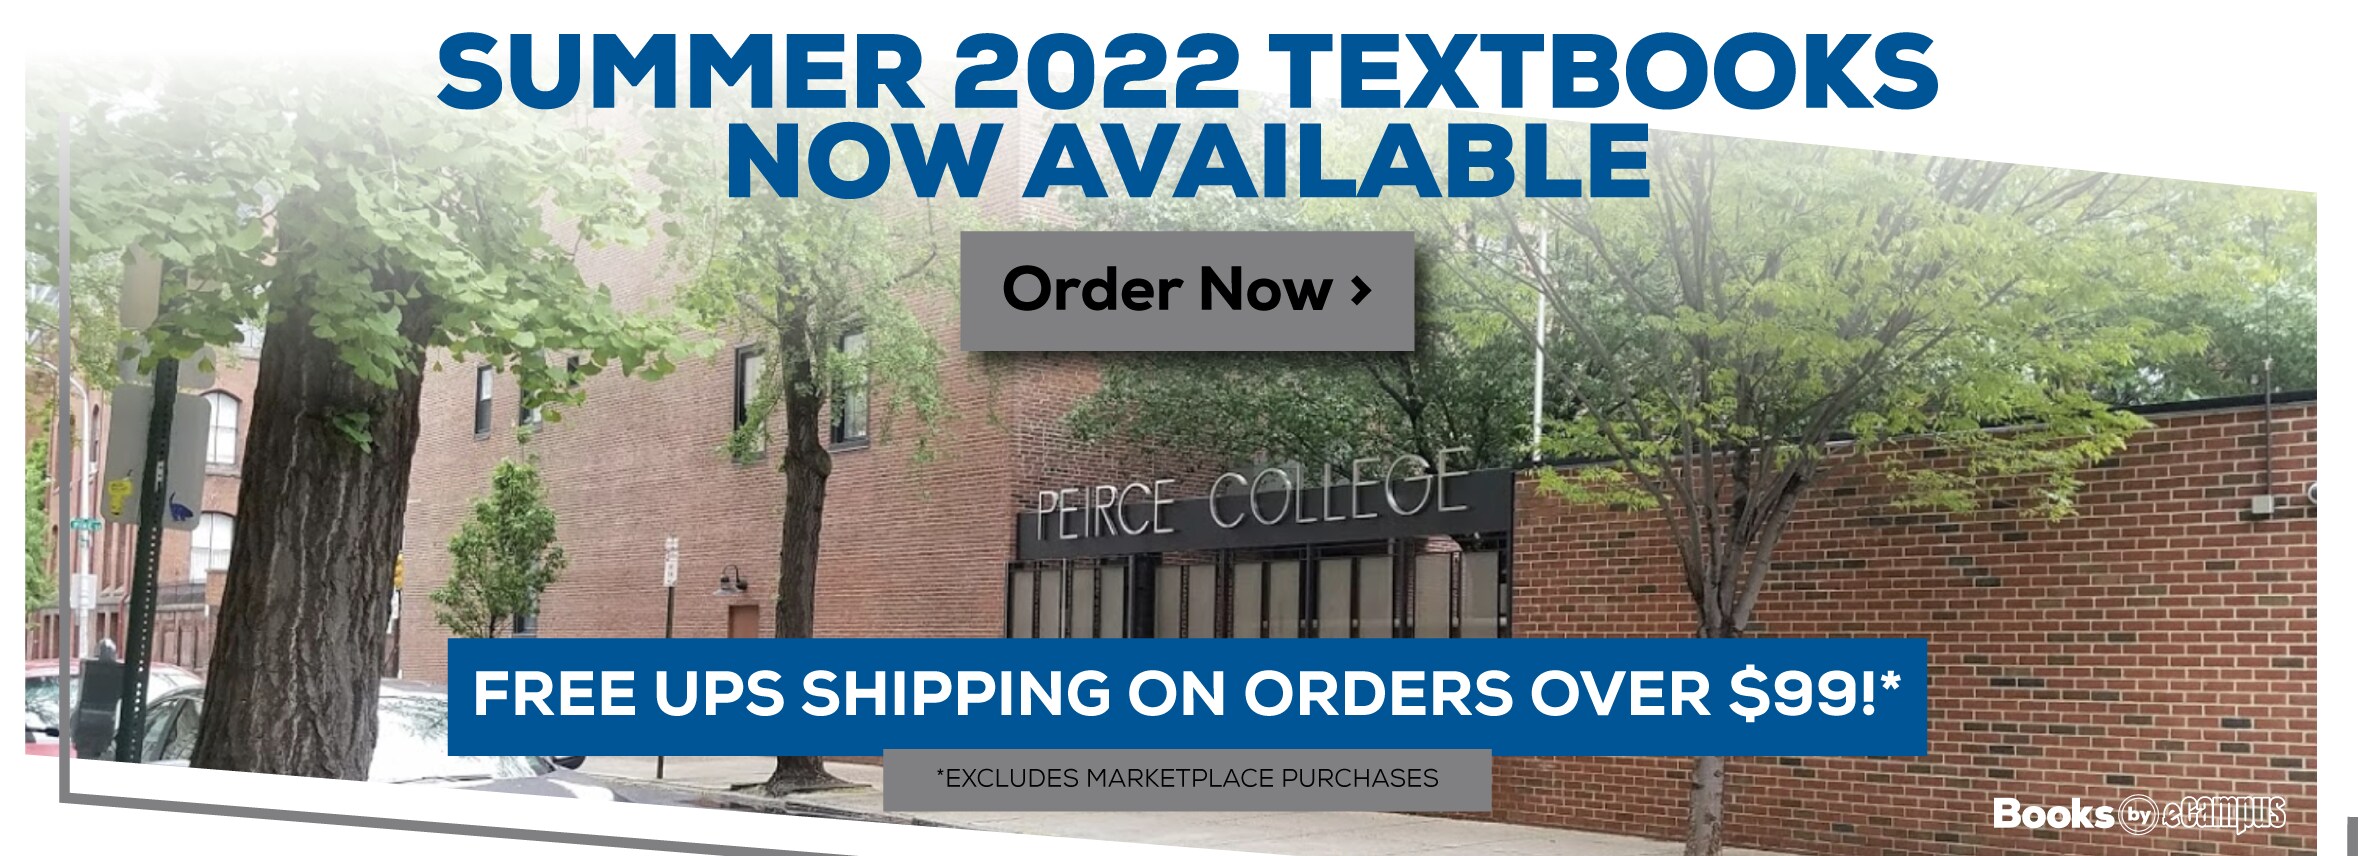 Summer 2022 textbooks now available. order now. free shipping on all orders. excludes marketplace purchases